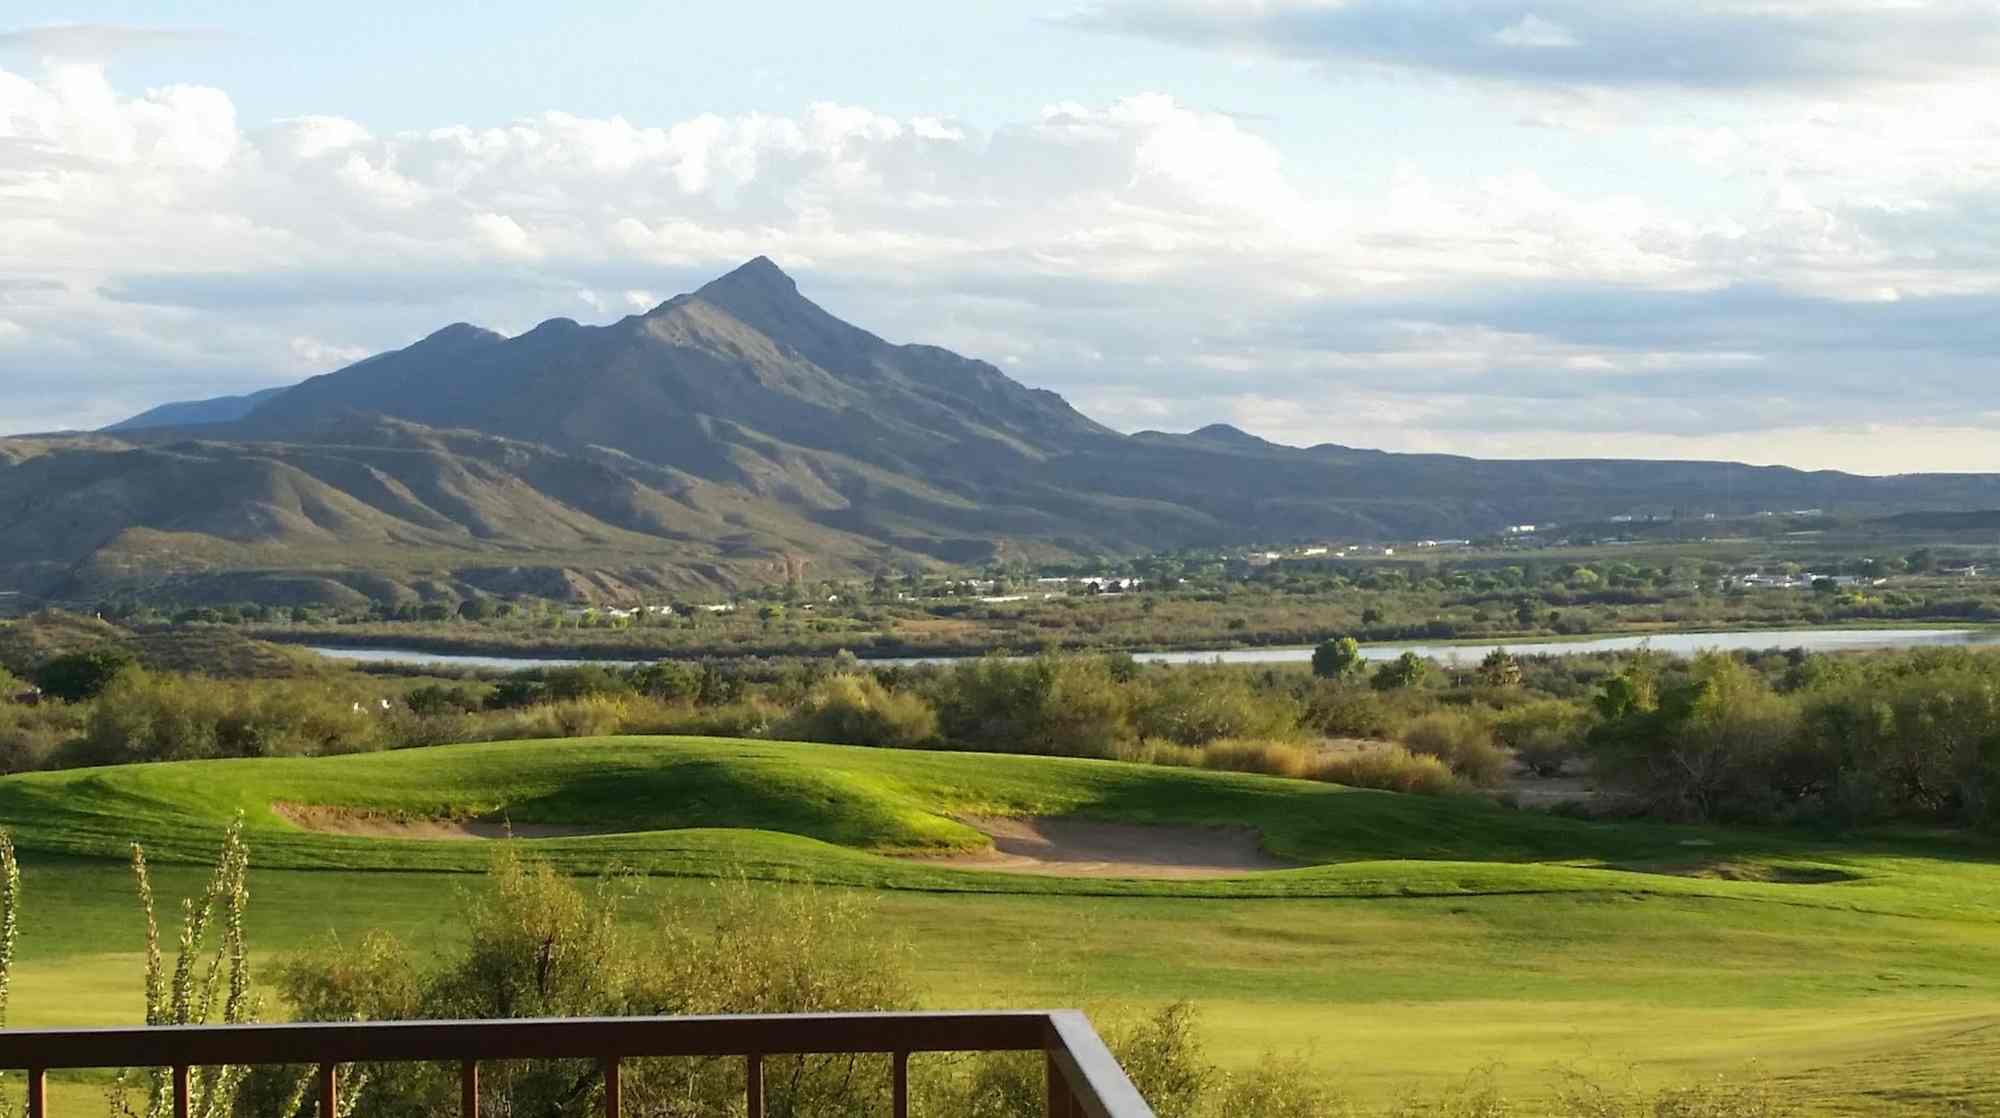 sierra del rio championship golf course view from the deck